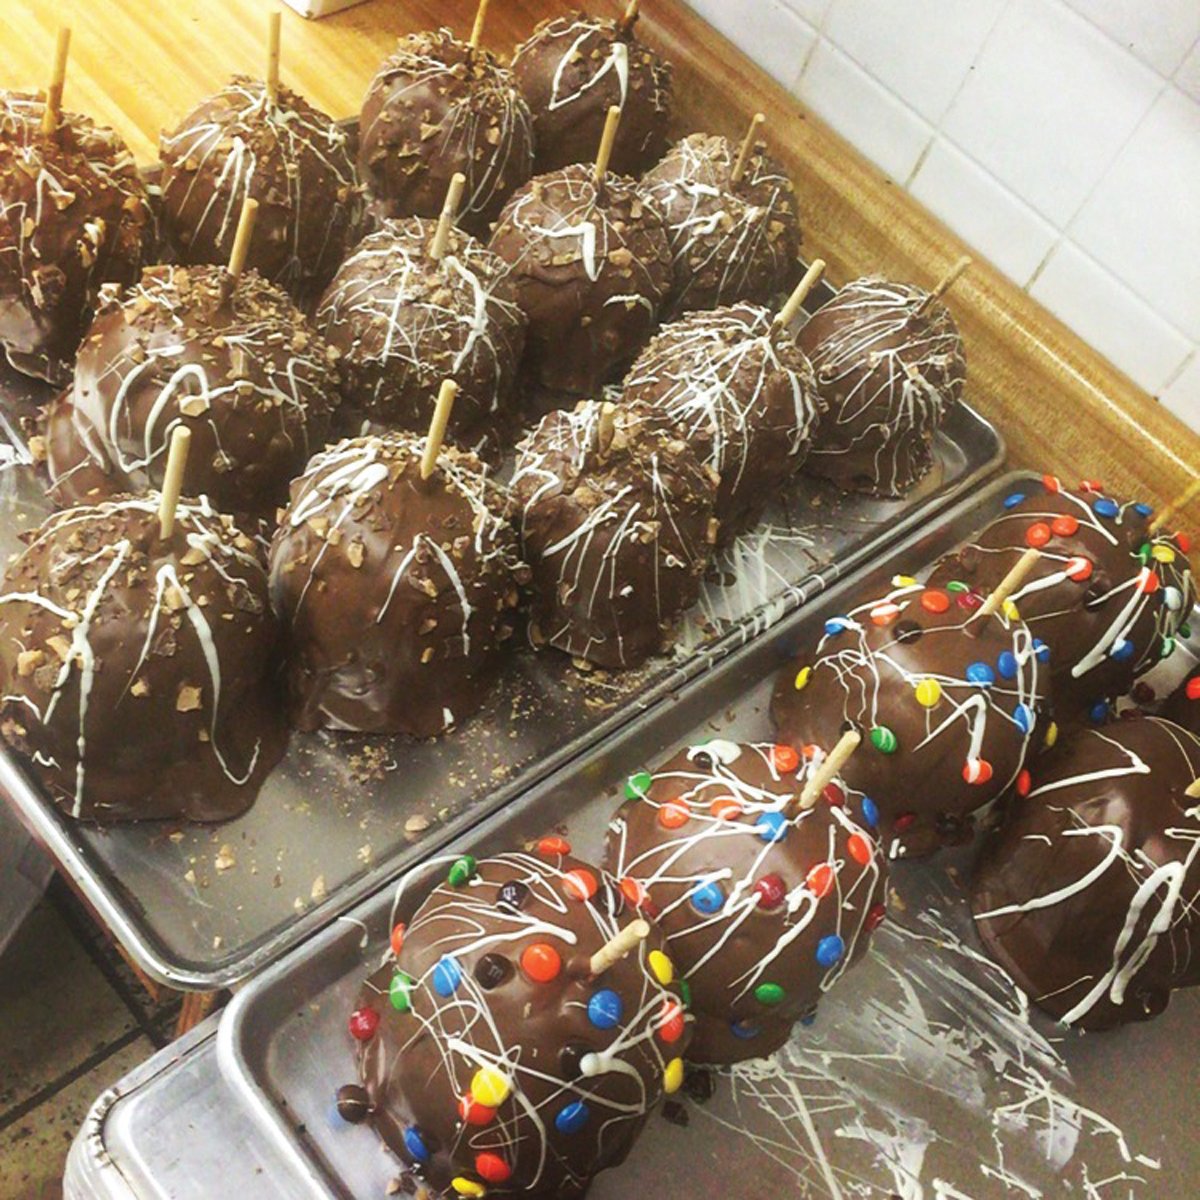 CANDYLAND: Appleland makes and sells fresh apple cider donuts and apple dumplings, gourmet chocolate covered candy apples and more. They will be bringing their tasty treats to this year’s Johnston Apple Festival.